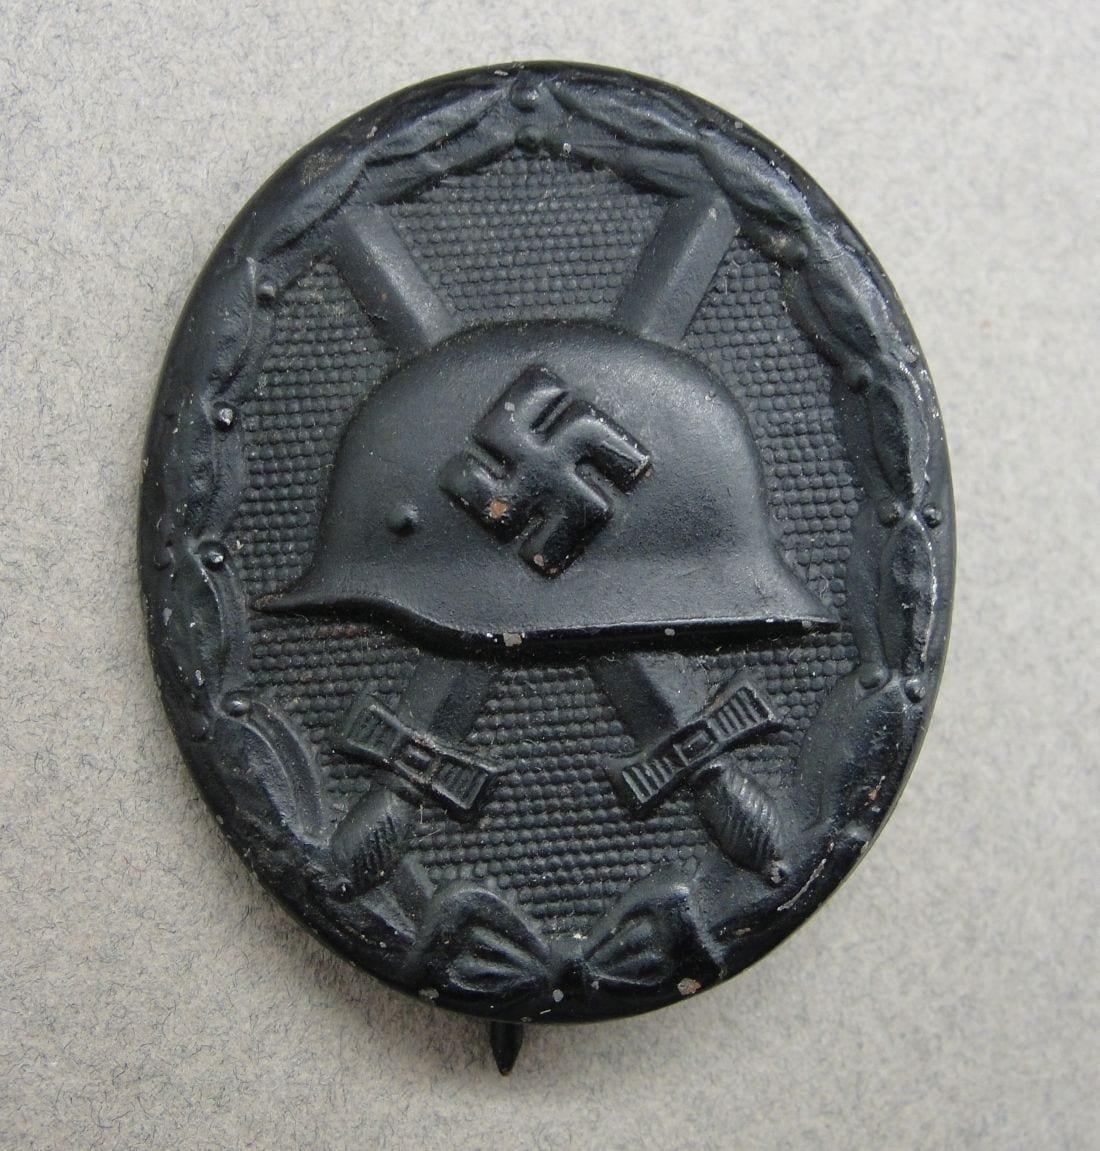 1939 Wound Badge, Black Grade, by "81"